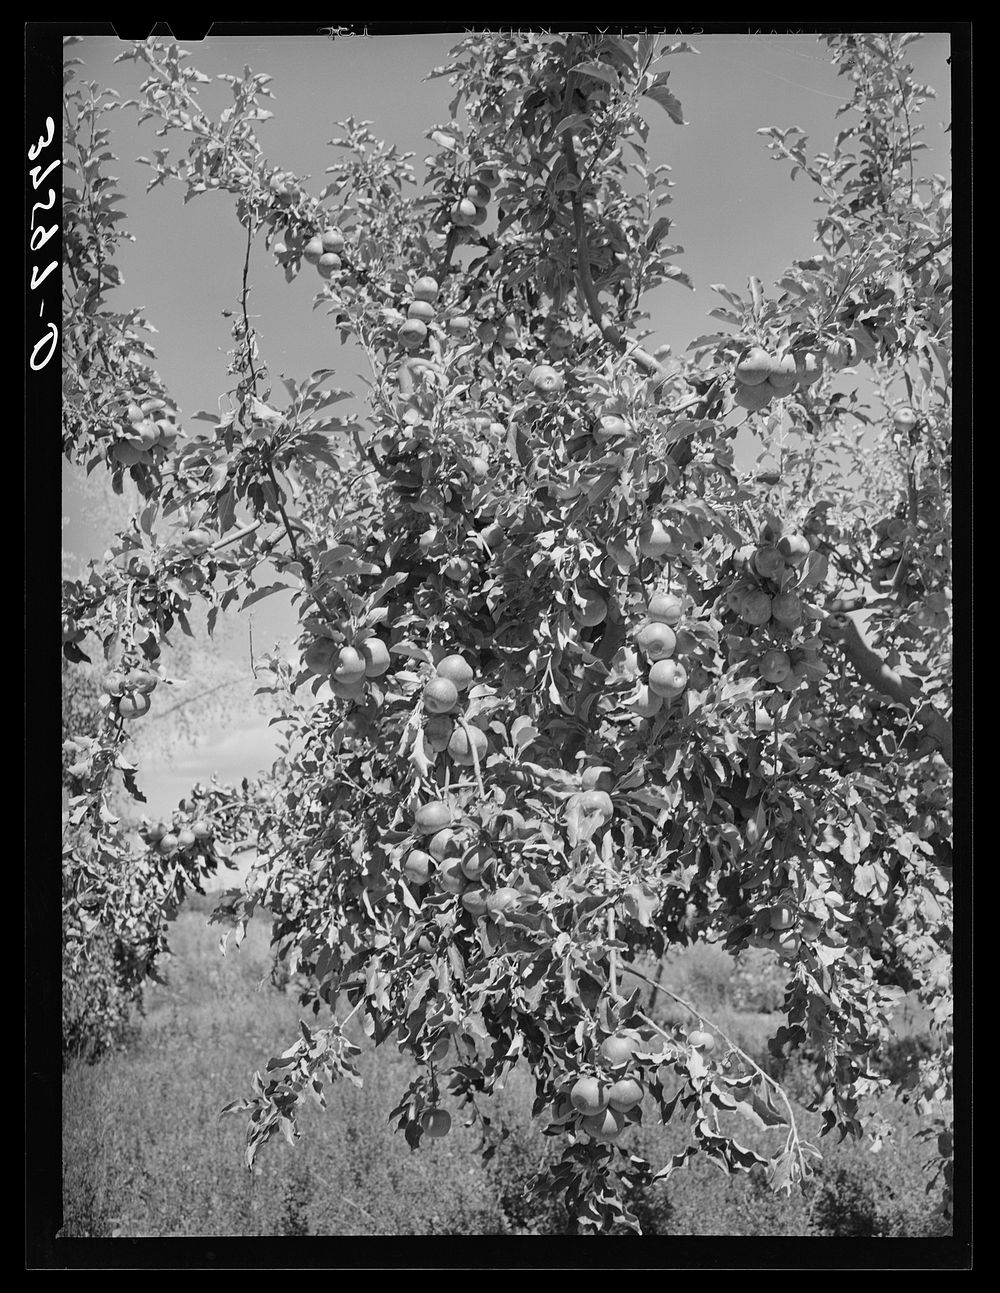 [Untitled photo, possibly related to: Apples are the main fruit crop of Delta County, Colorado] by Russell Lee